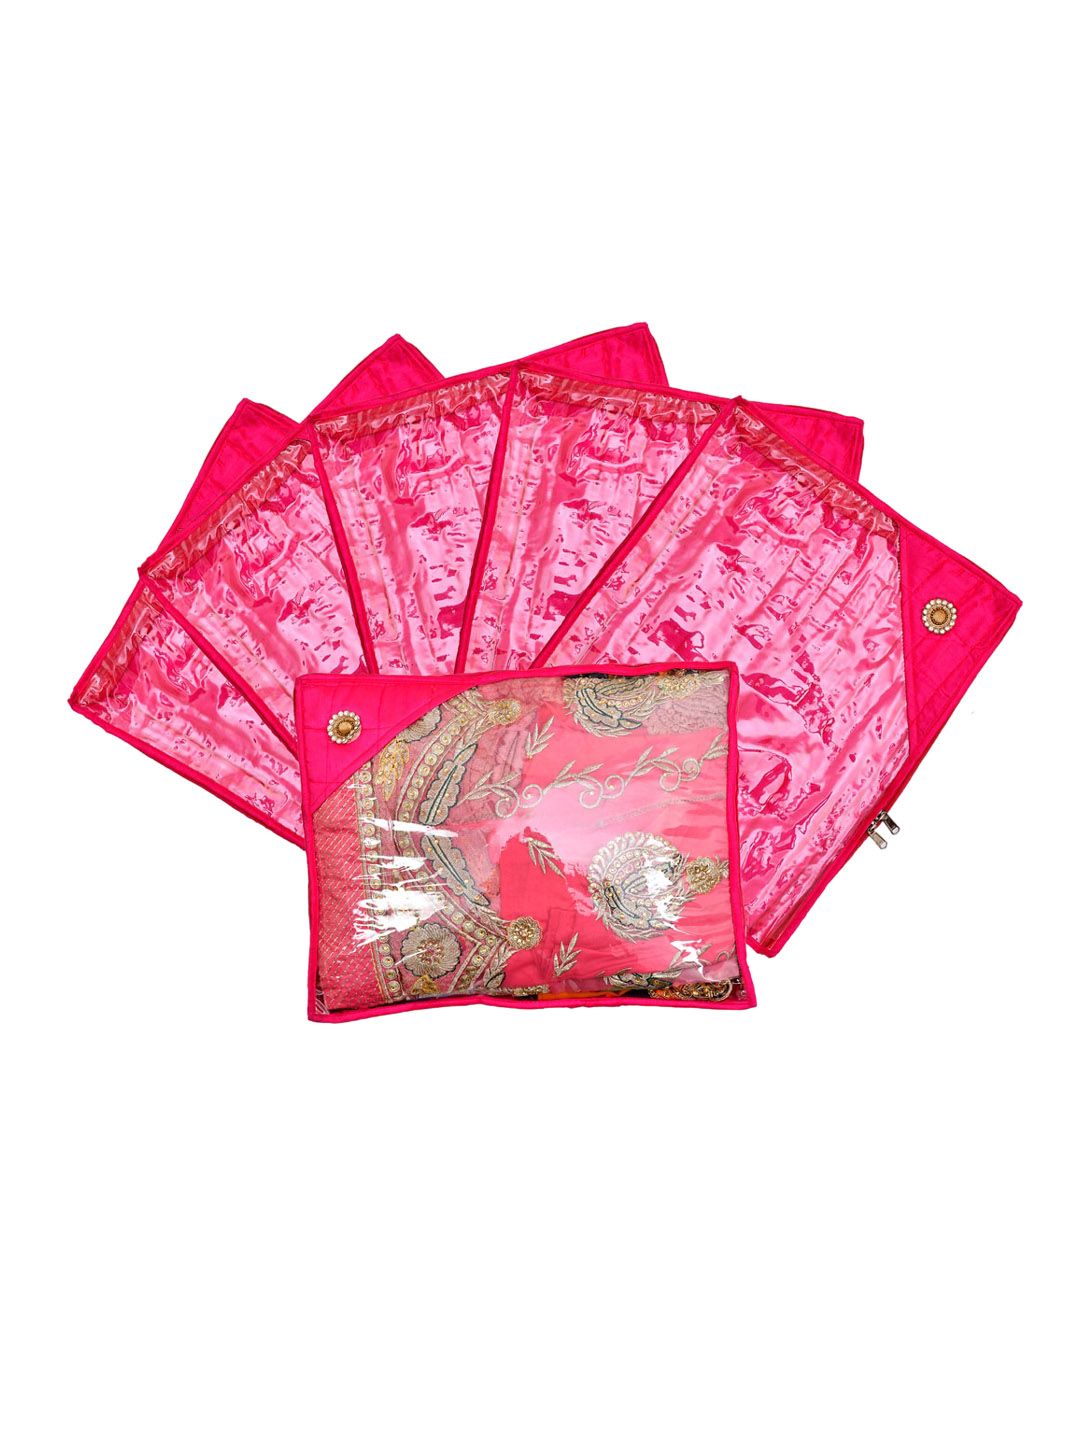 Kuber Industries Set Of 6 Pink & Transparent Solid Silk Single Packing Saree Cover Organizers Price in India